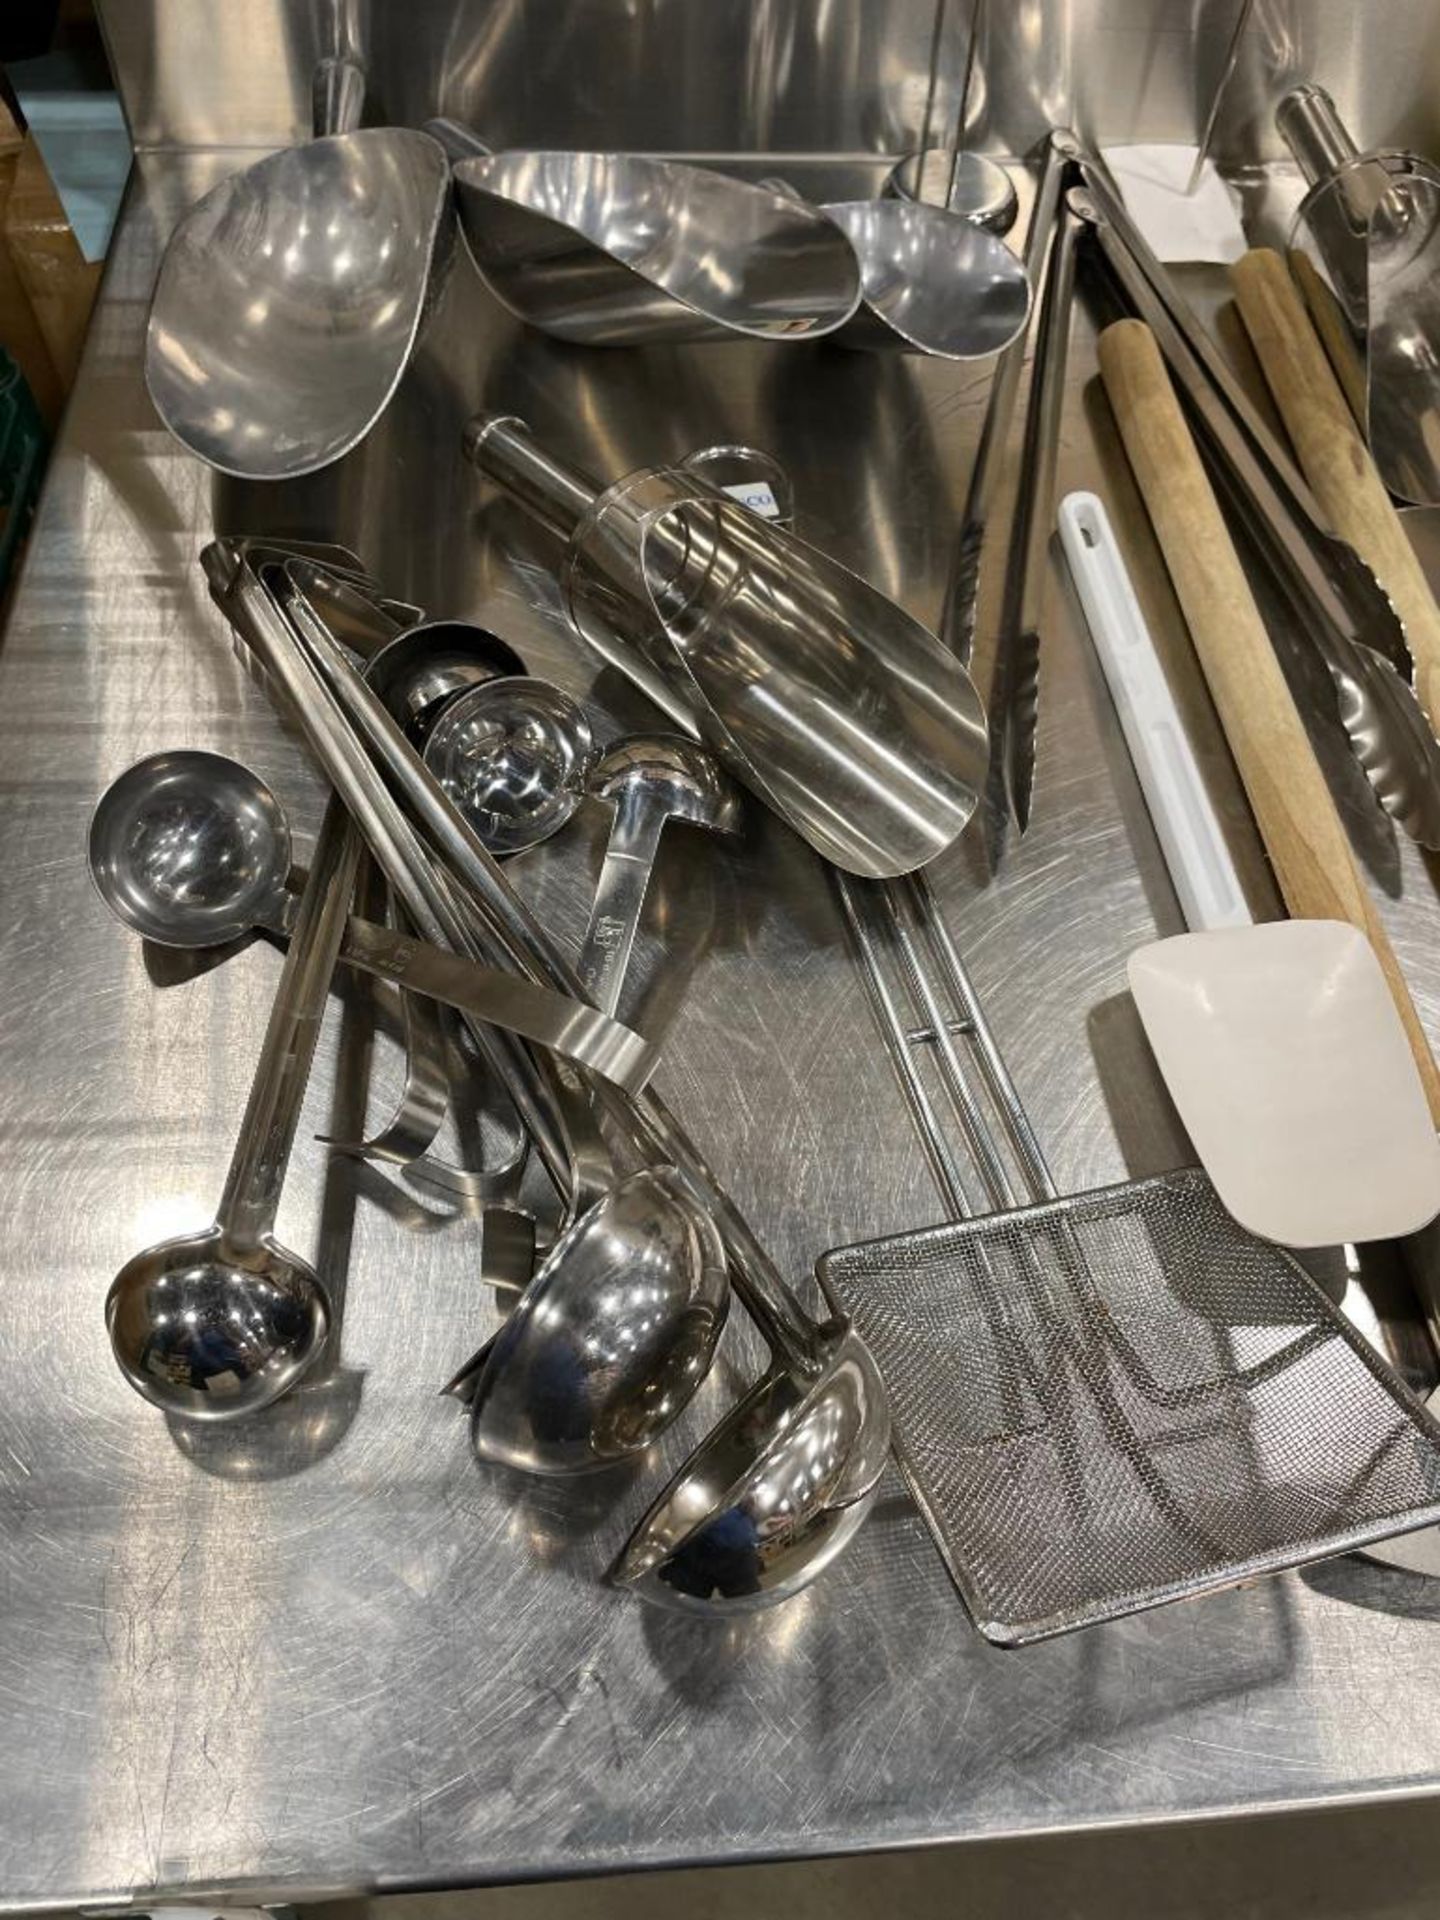 STAINLESS STEEL LADES, ICE SCOOPS, WIRE BRUSHES & FOOD STORAGE CONTAINER - Image 2 of 11